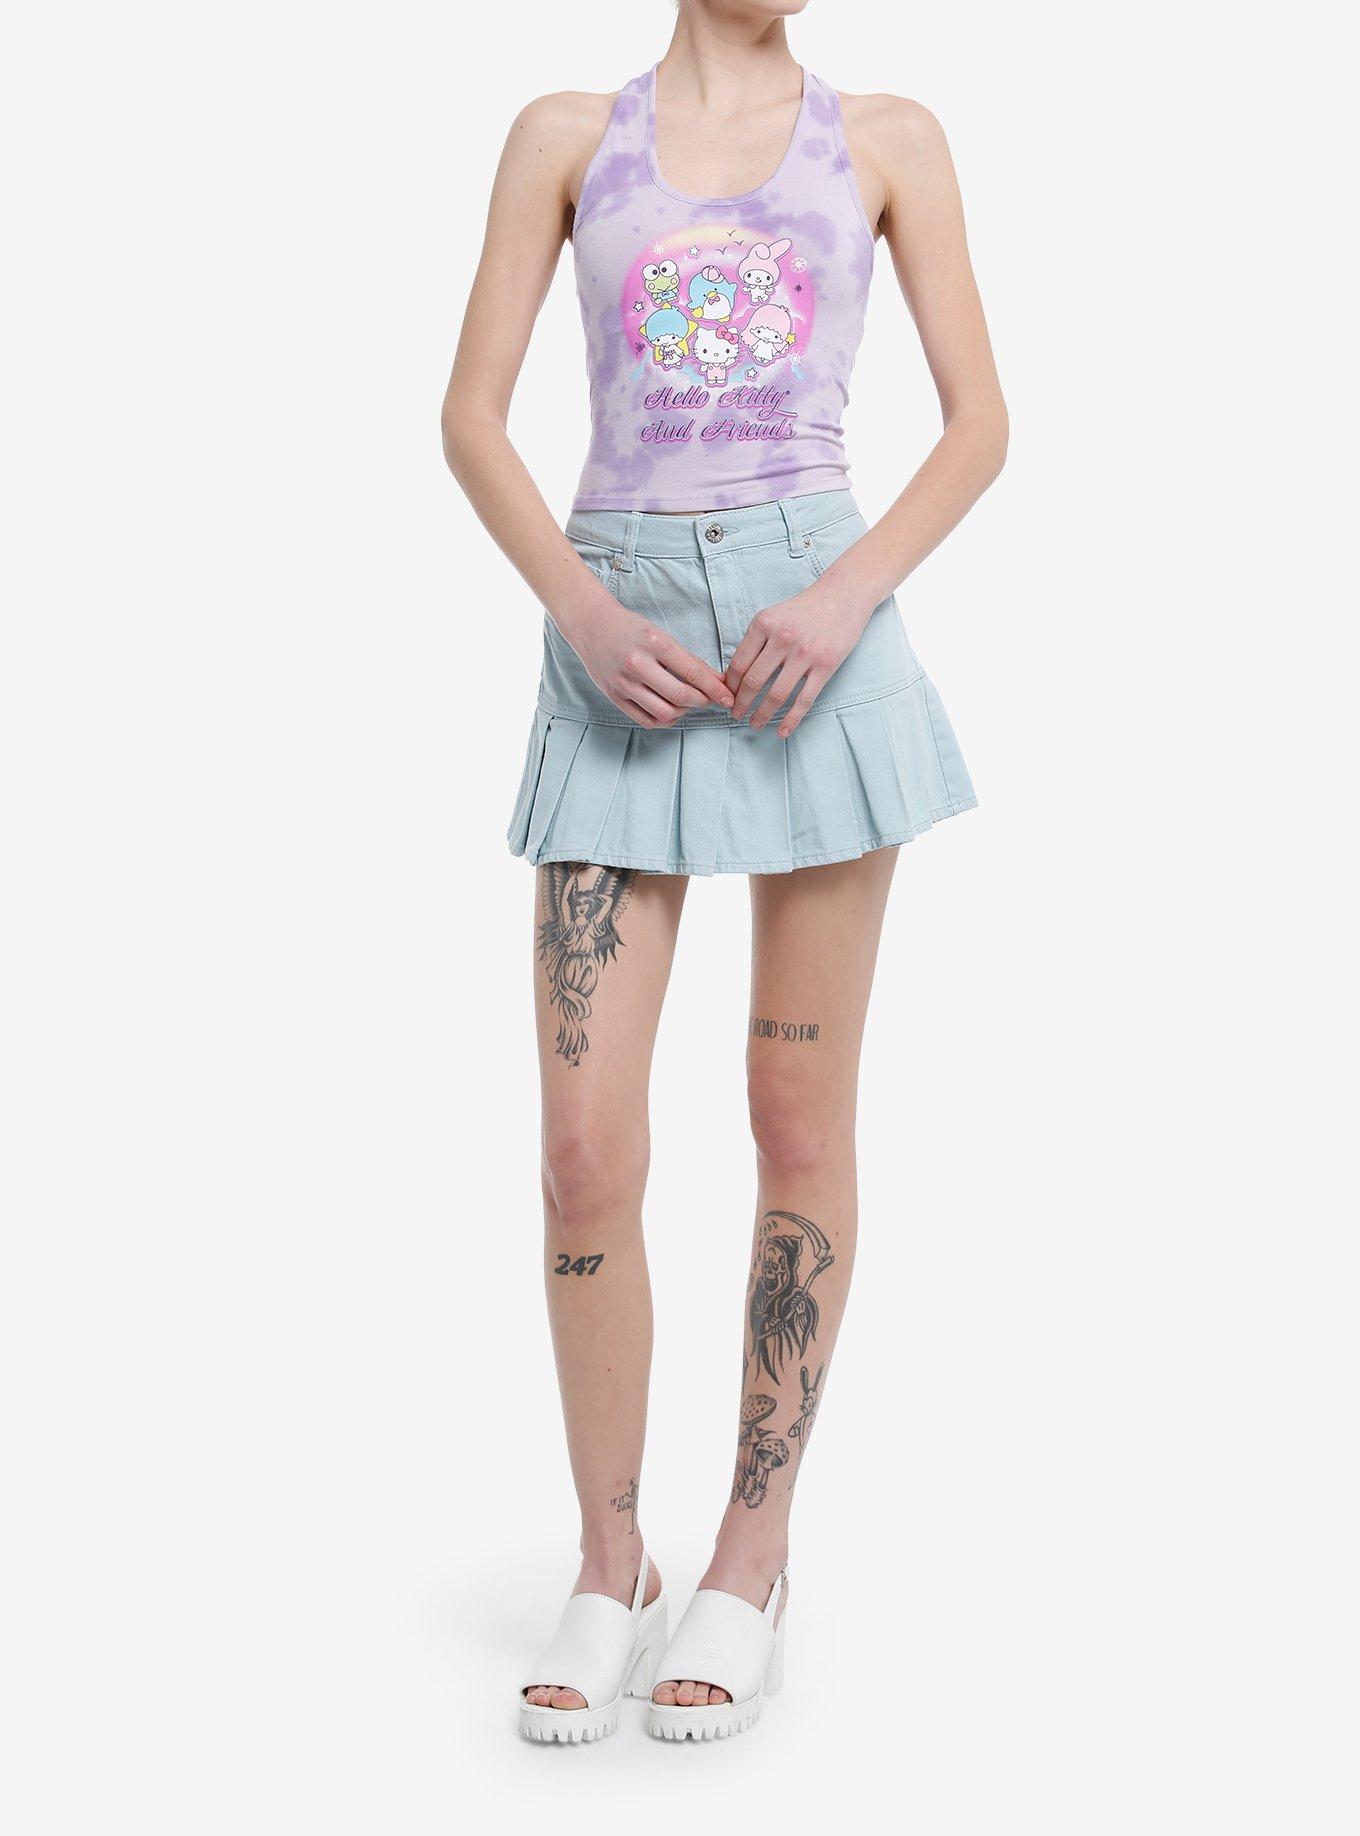 Hello Kitty And Friends Group Tie-Dye Girls Halter Top